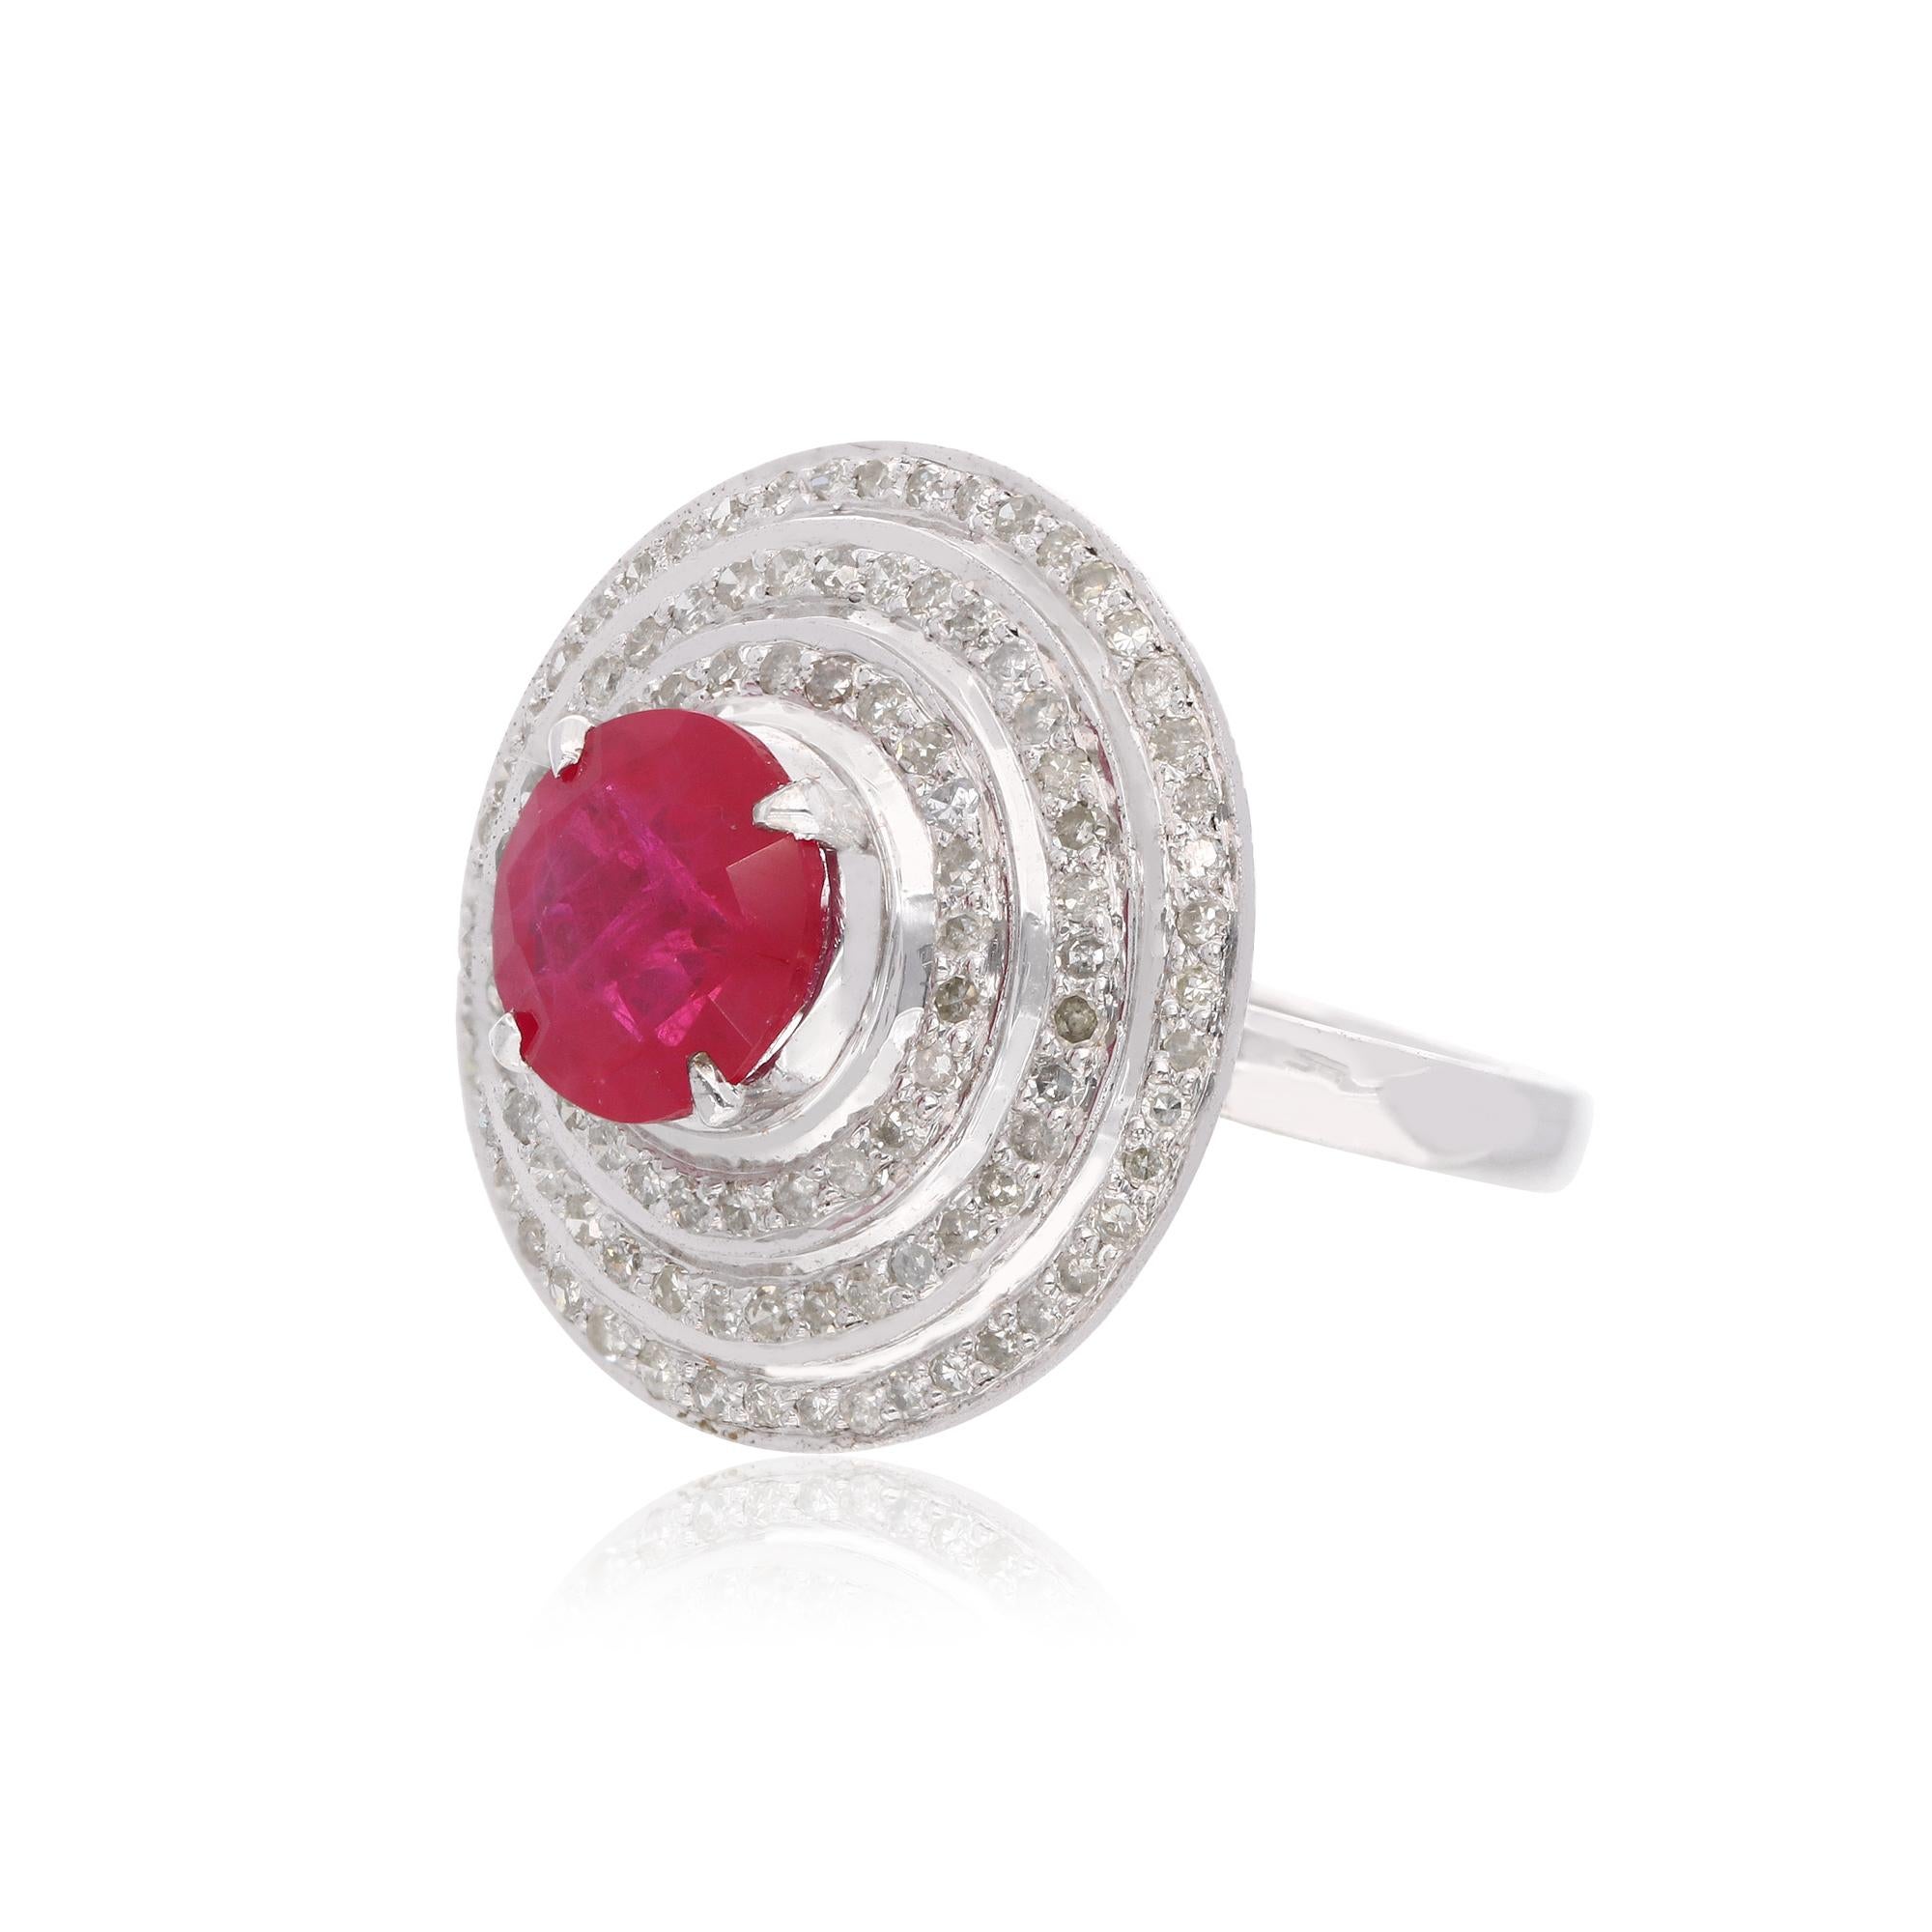 Item Code :- CNS-15651B
Gross Wt. :- 7.42 gm
18k Gold Wt. :- 6.45 gm
Diamond Wt. :- 1.05 Ct. ( SI Clarity & HI Color )
Synthetic Ruby Wt. :- 3.55 Ct.
Ring Size :- 7 US & All size available